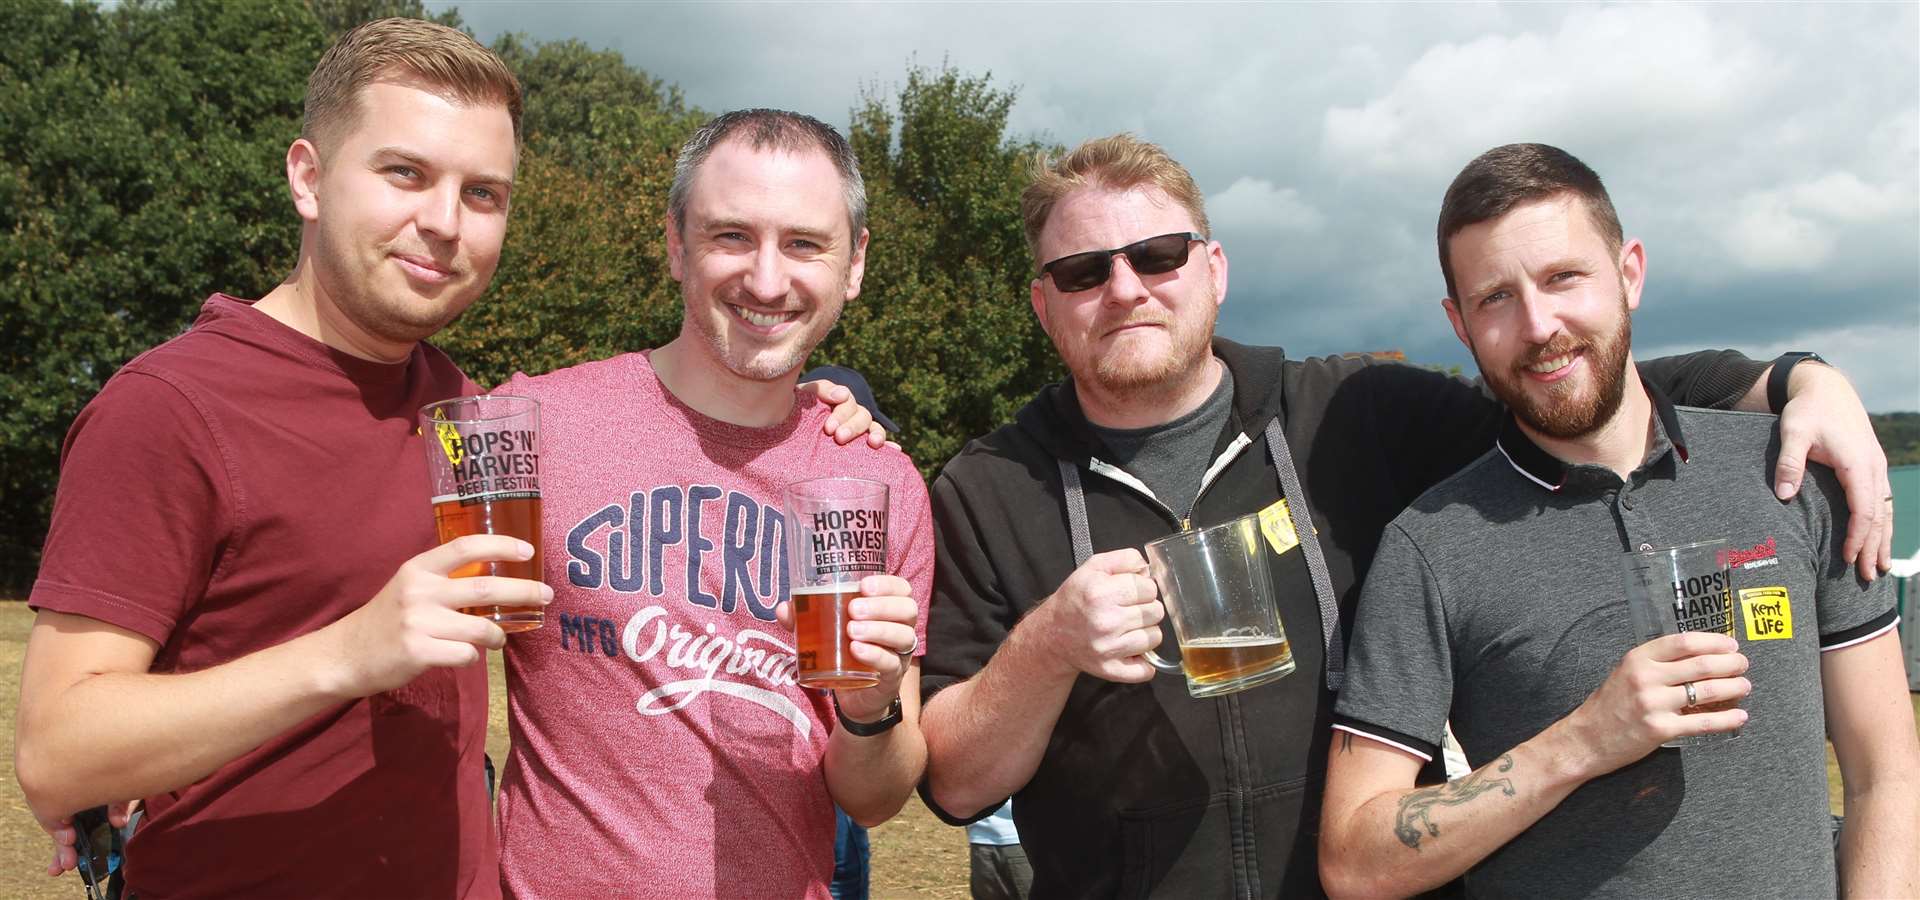 Last year's Hops and Harvest Beer Festival at Kent Life Picture: John Westhrop